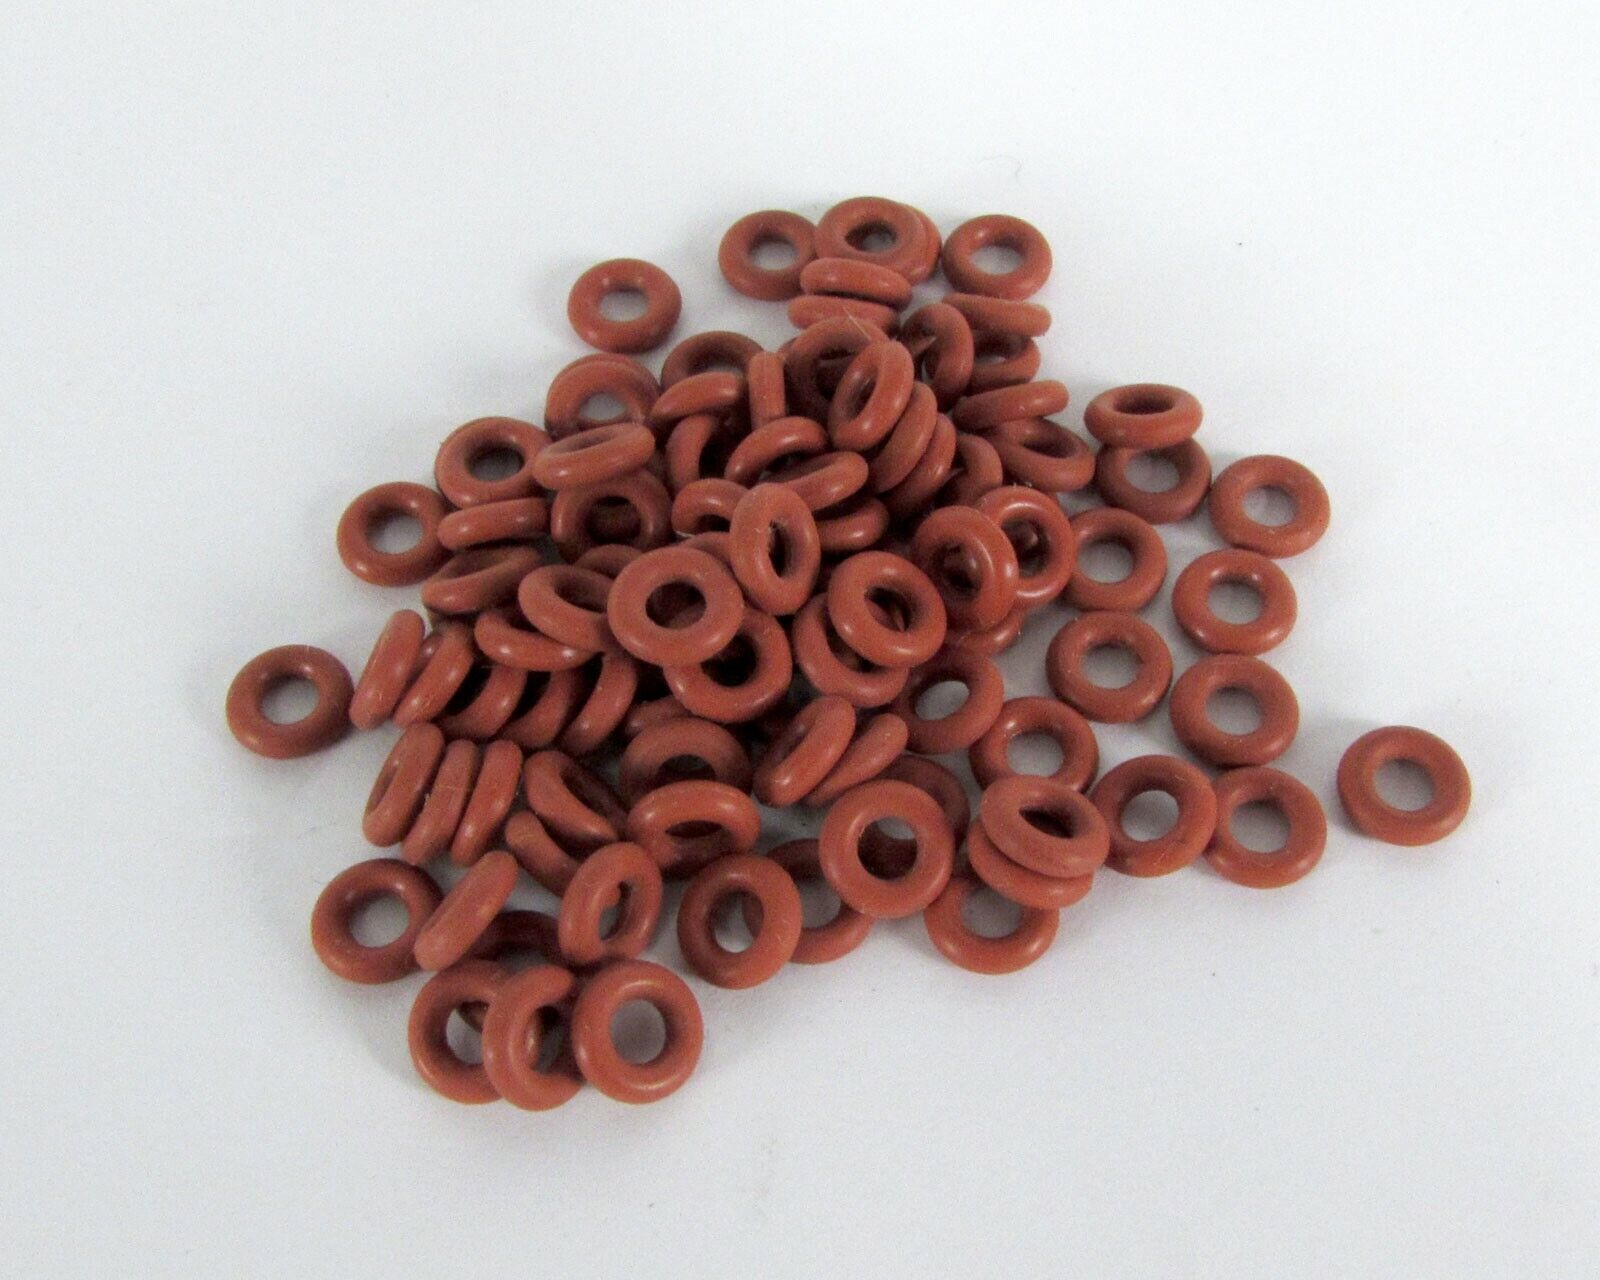 Lot of (100) Small O-Ring Red Rubber Outer Diameter 1/4" Unbranded Does Not Apply